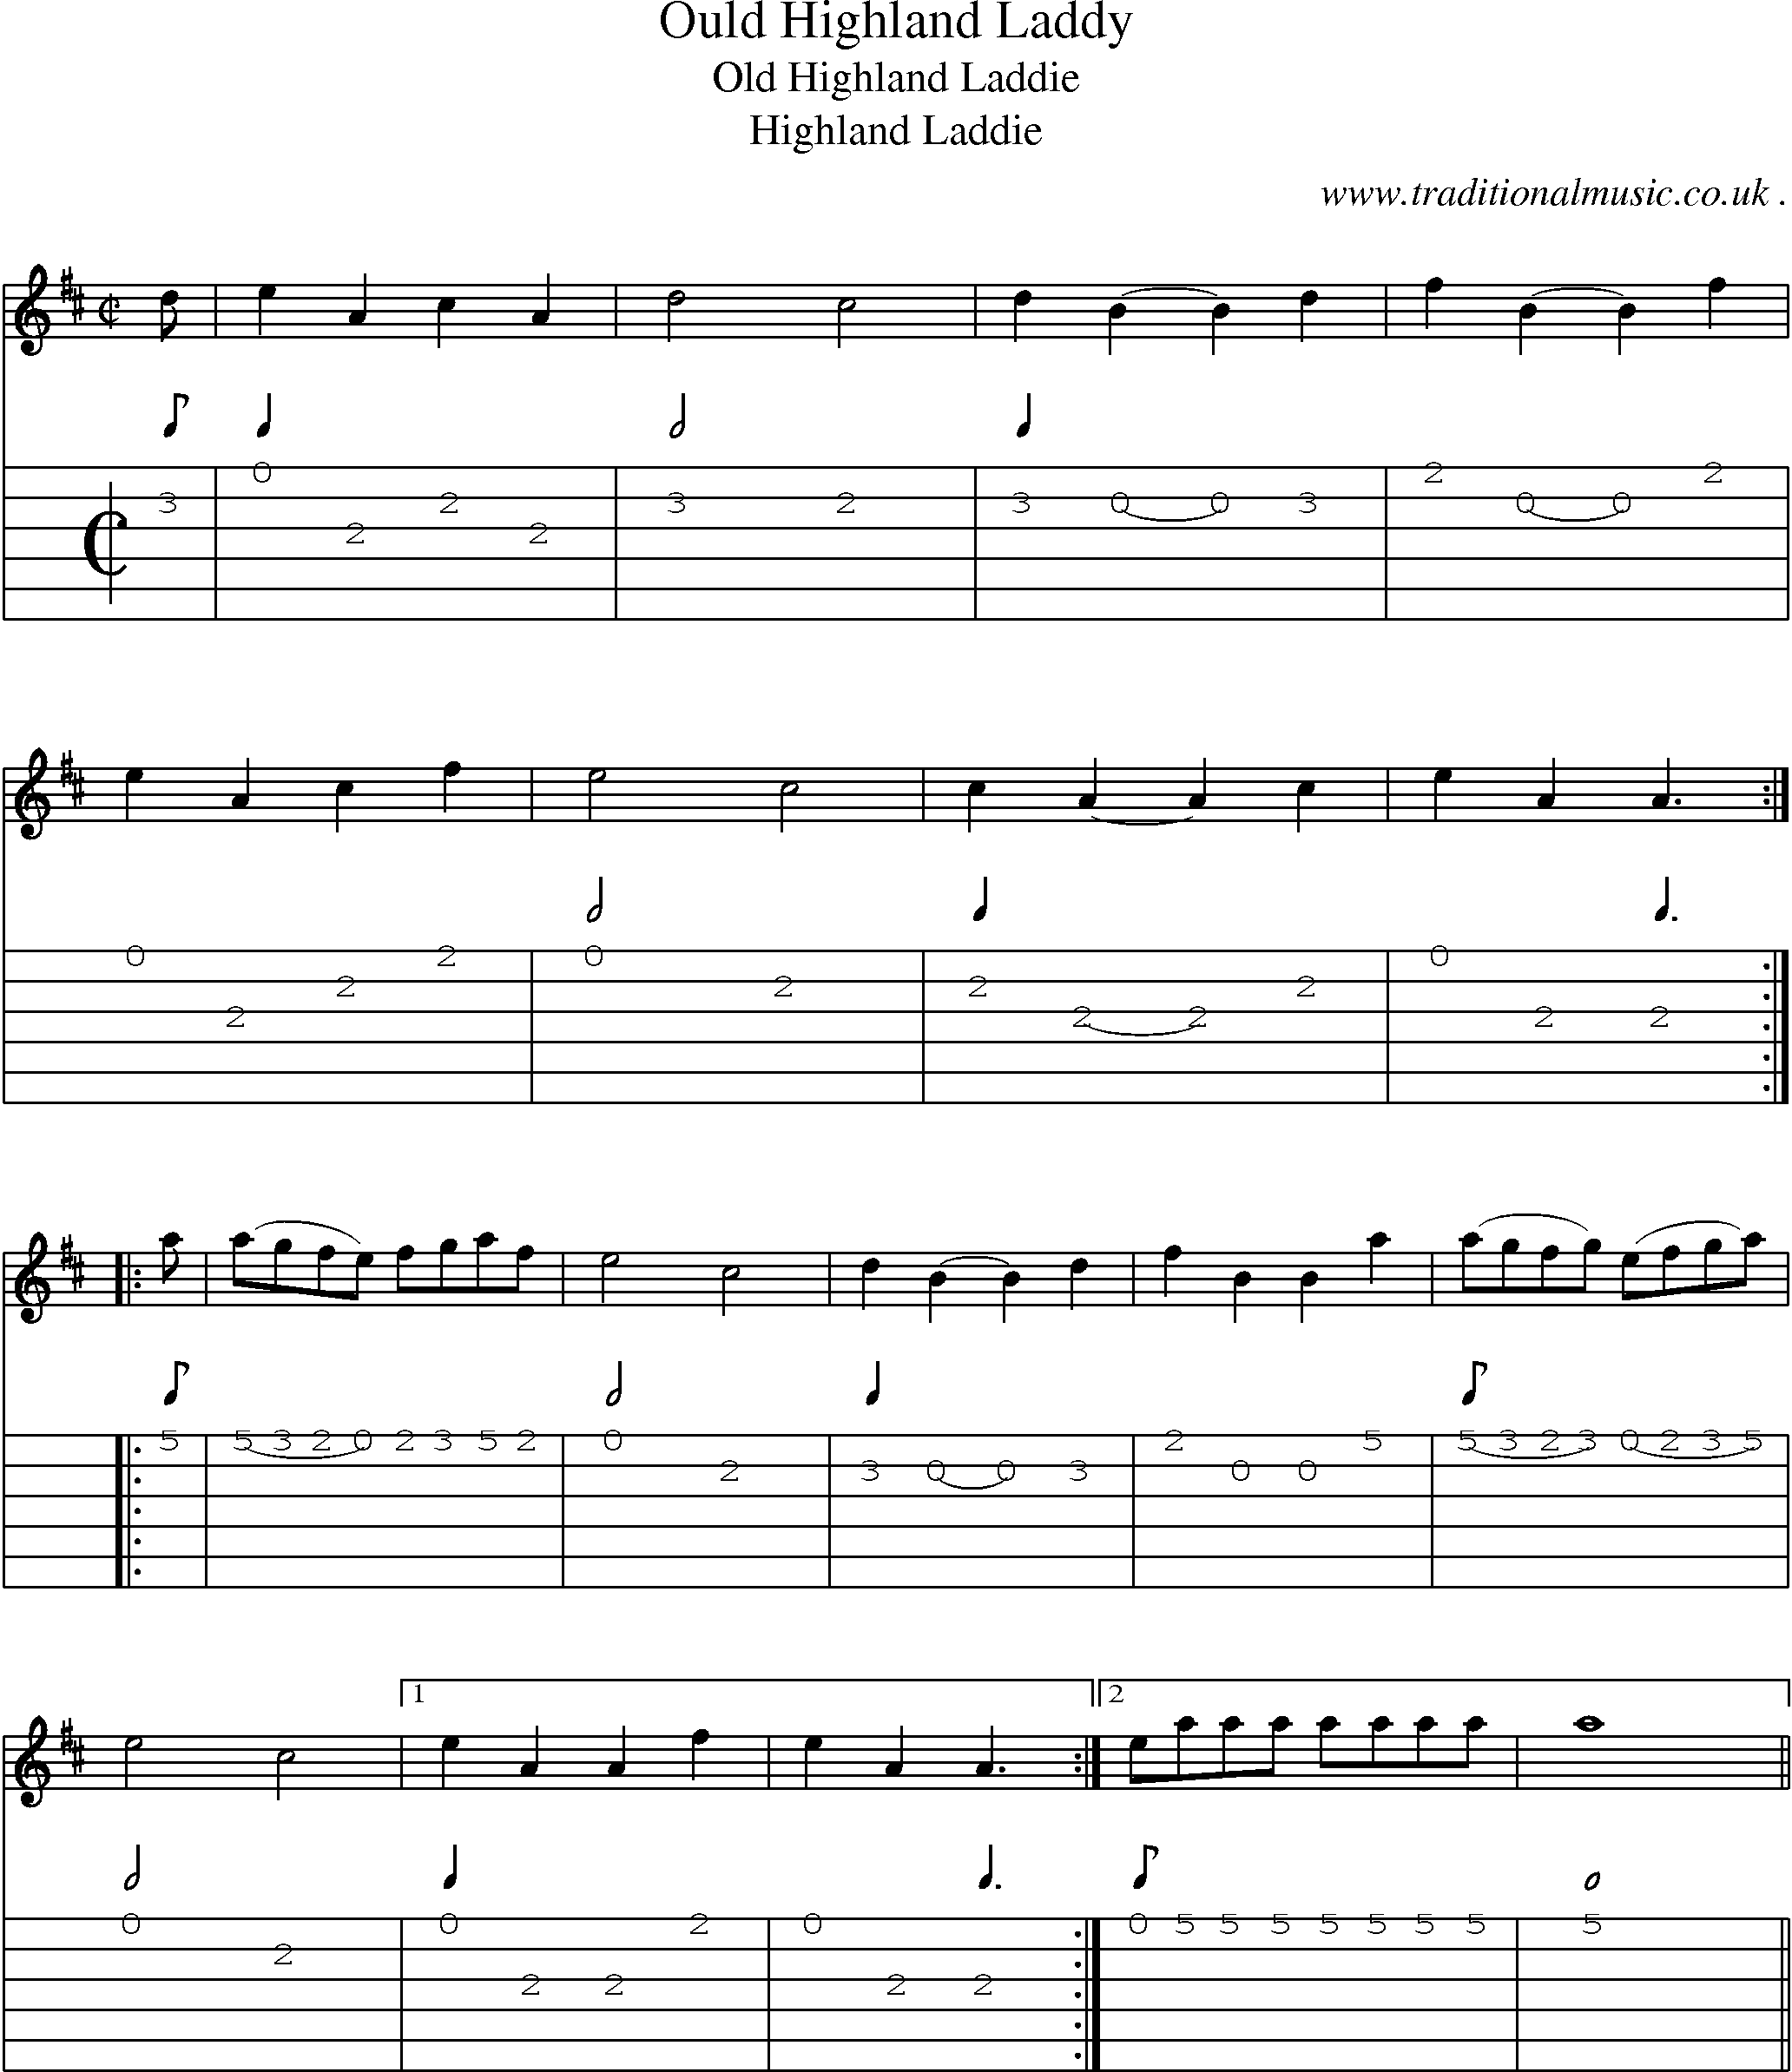 Sheet-Music and Guitar Tabs for Ould Highland Laddy